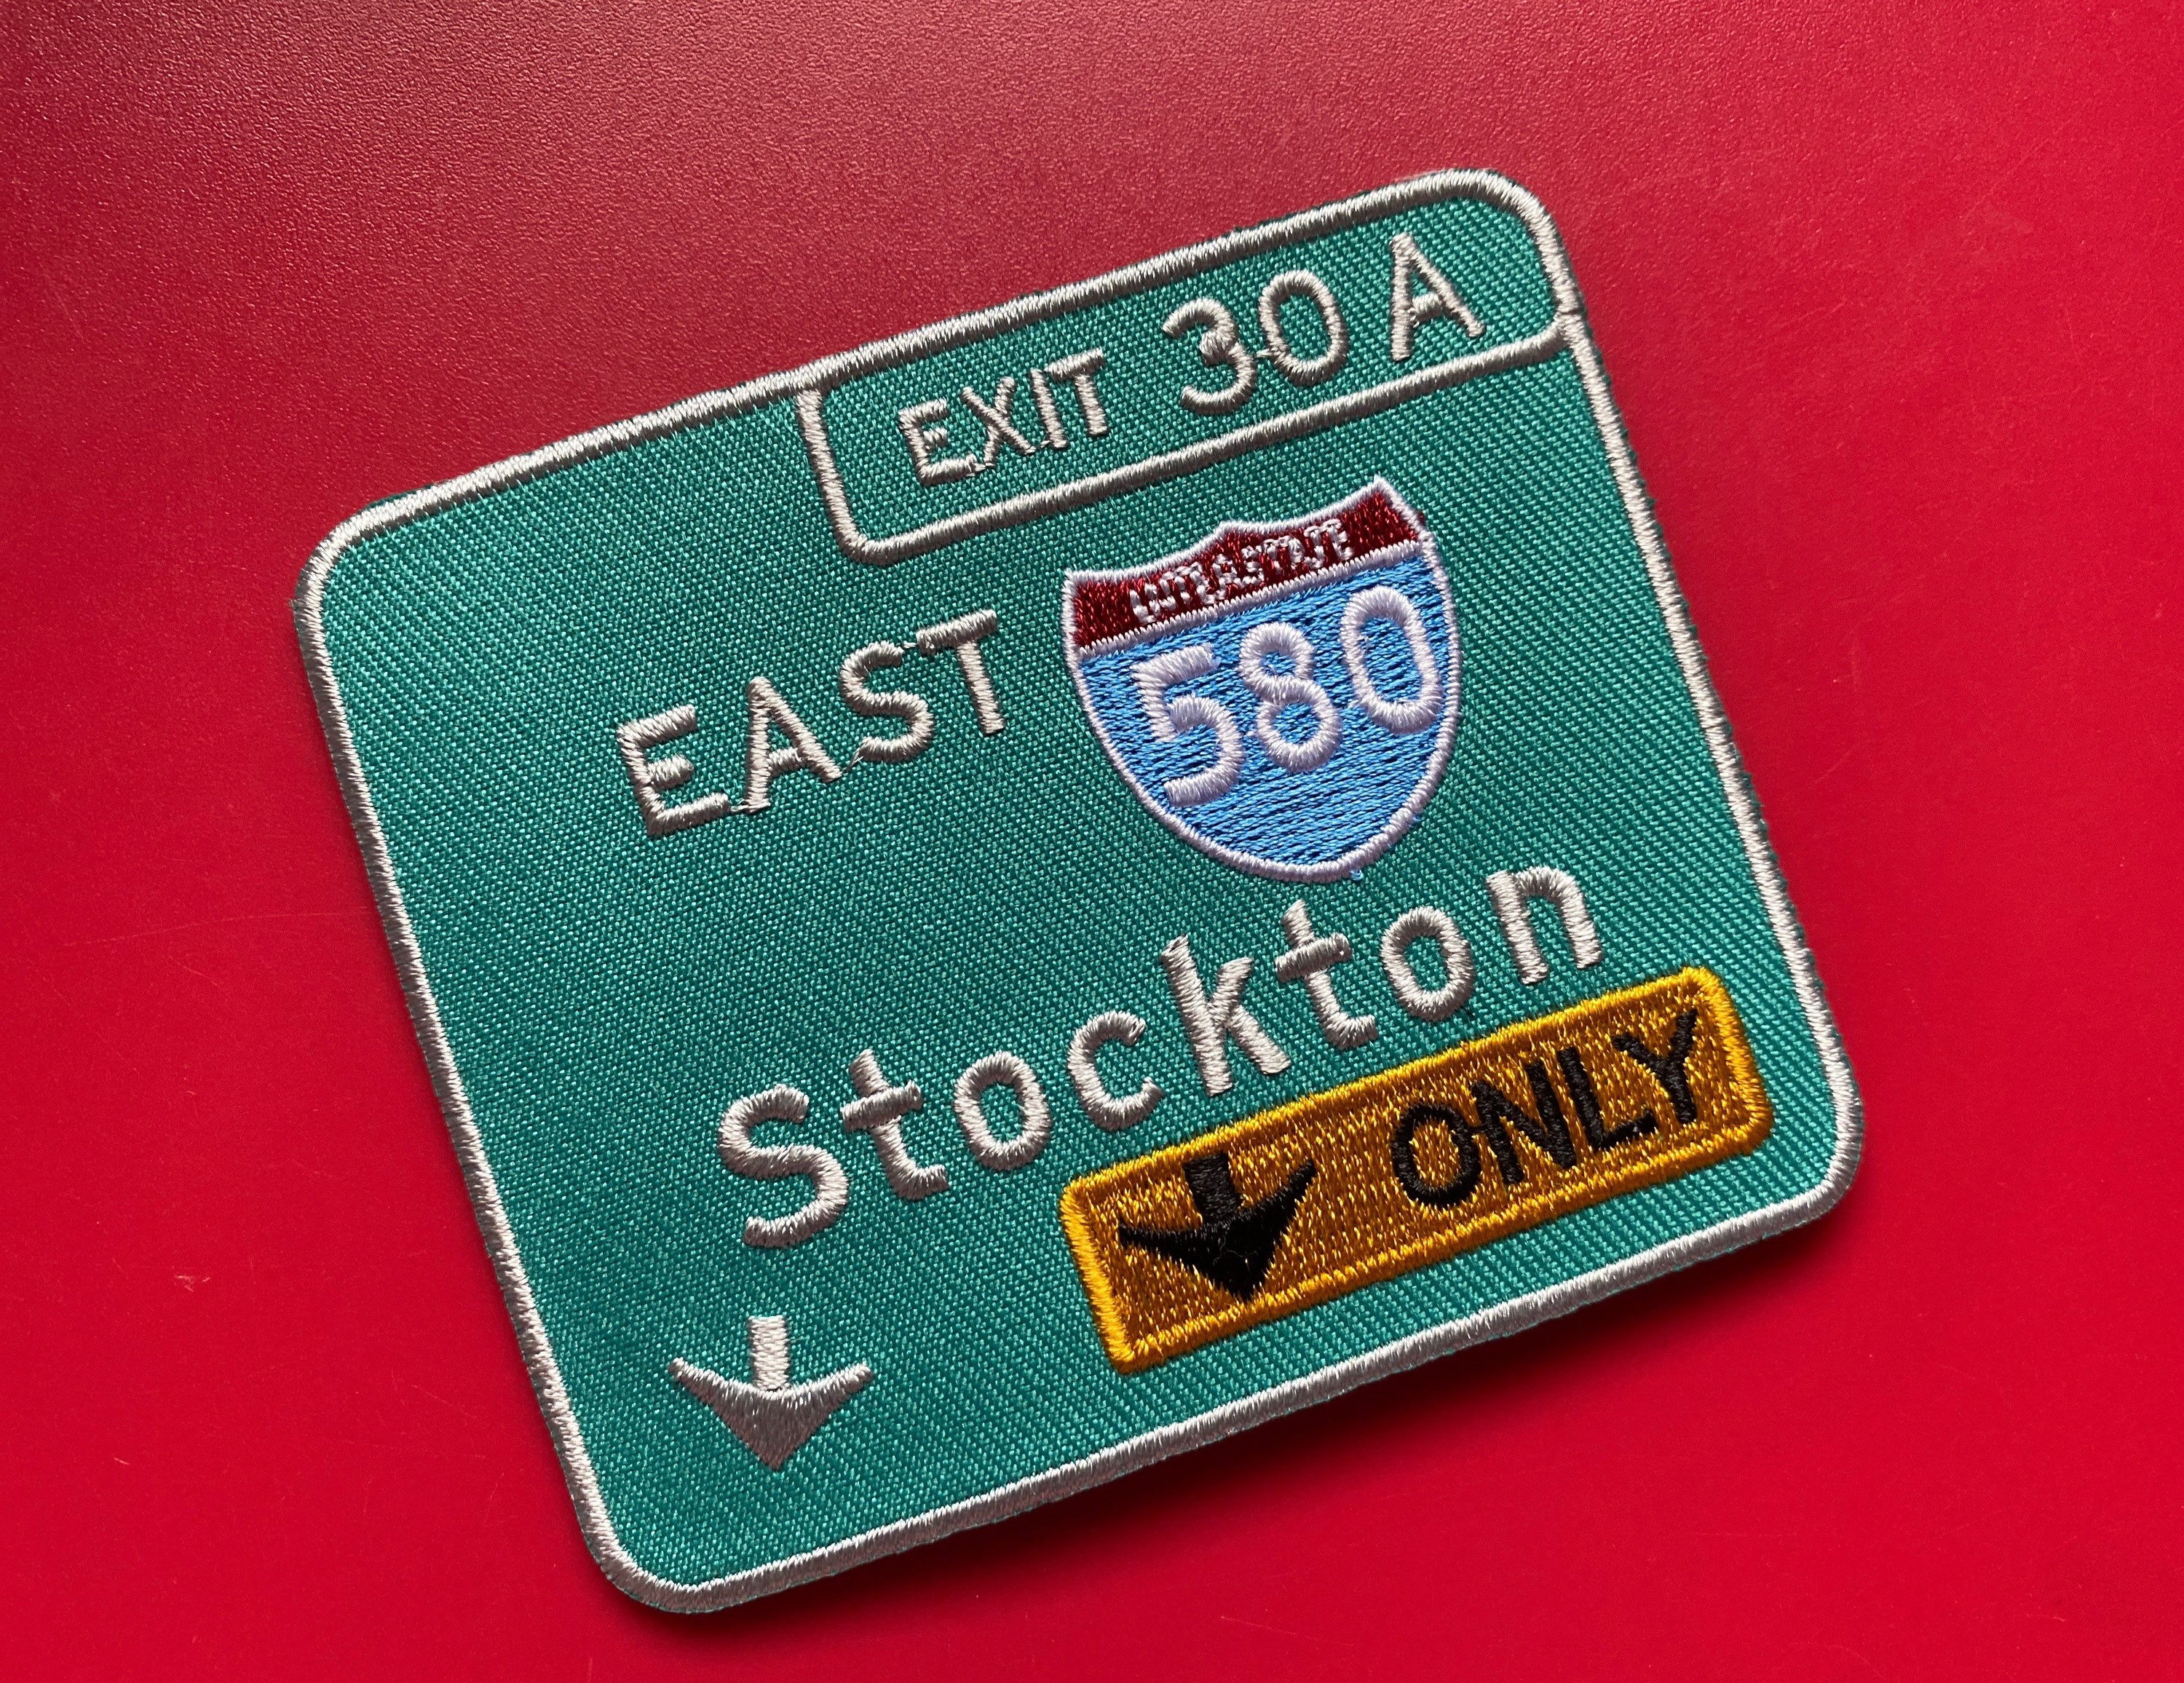 Stockton Only California 580 Freeway Embroidered Iron on Patch image